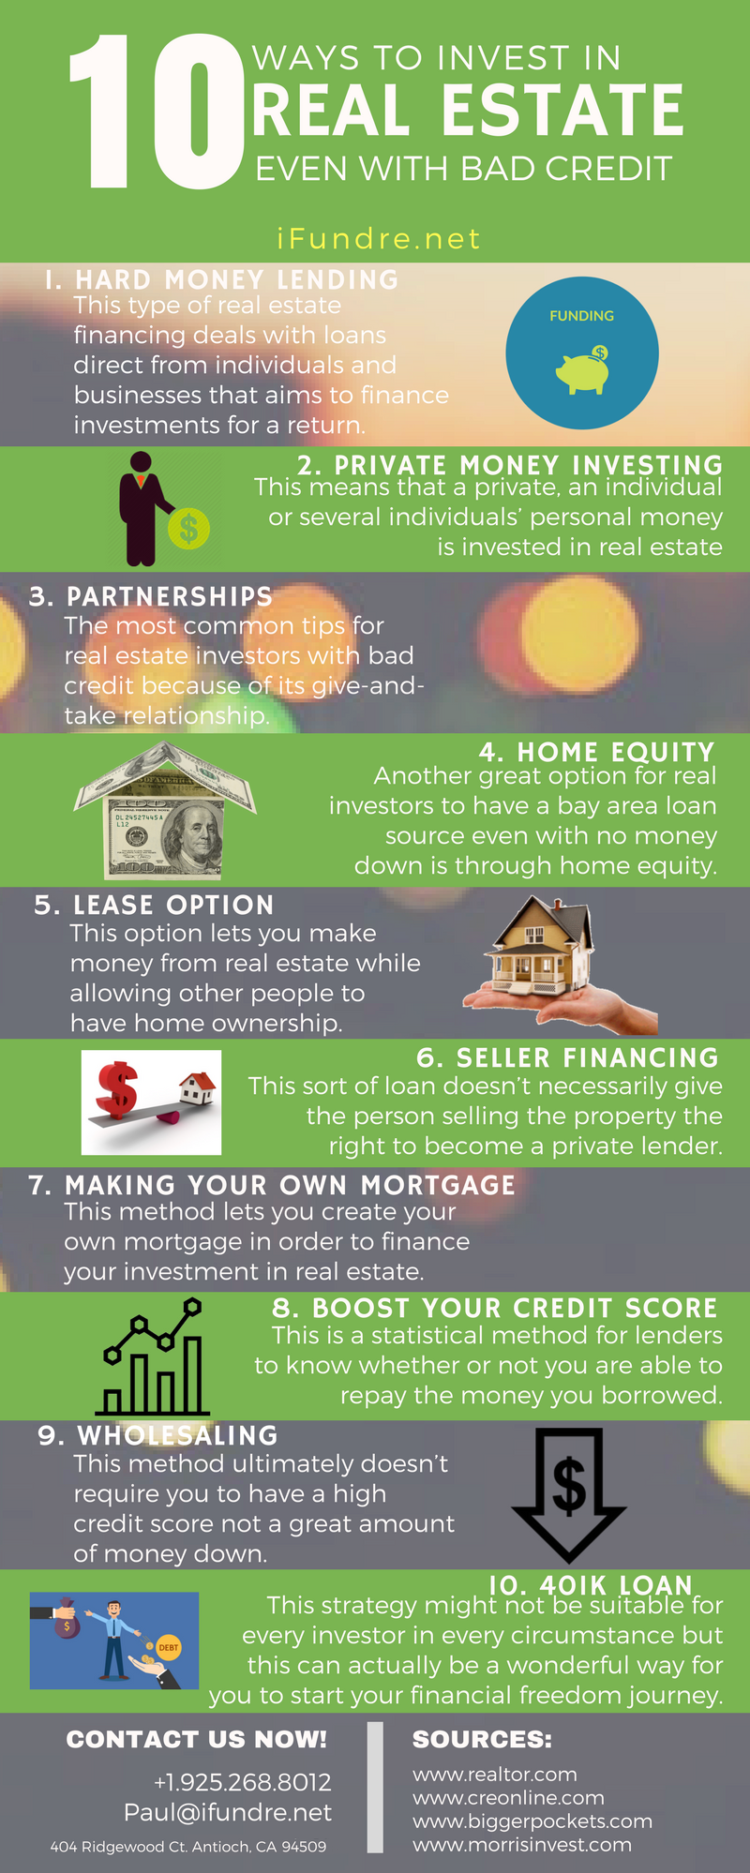 10 Ways to Invest in Real Estate Even with Bad Credit